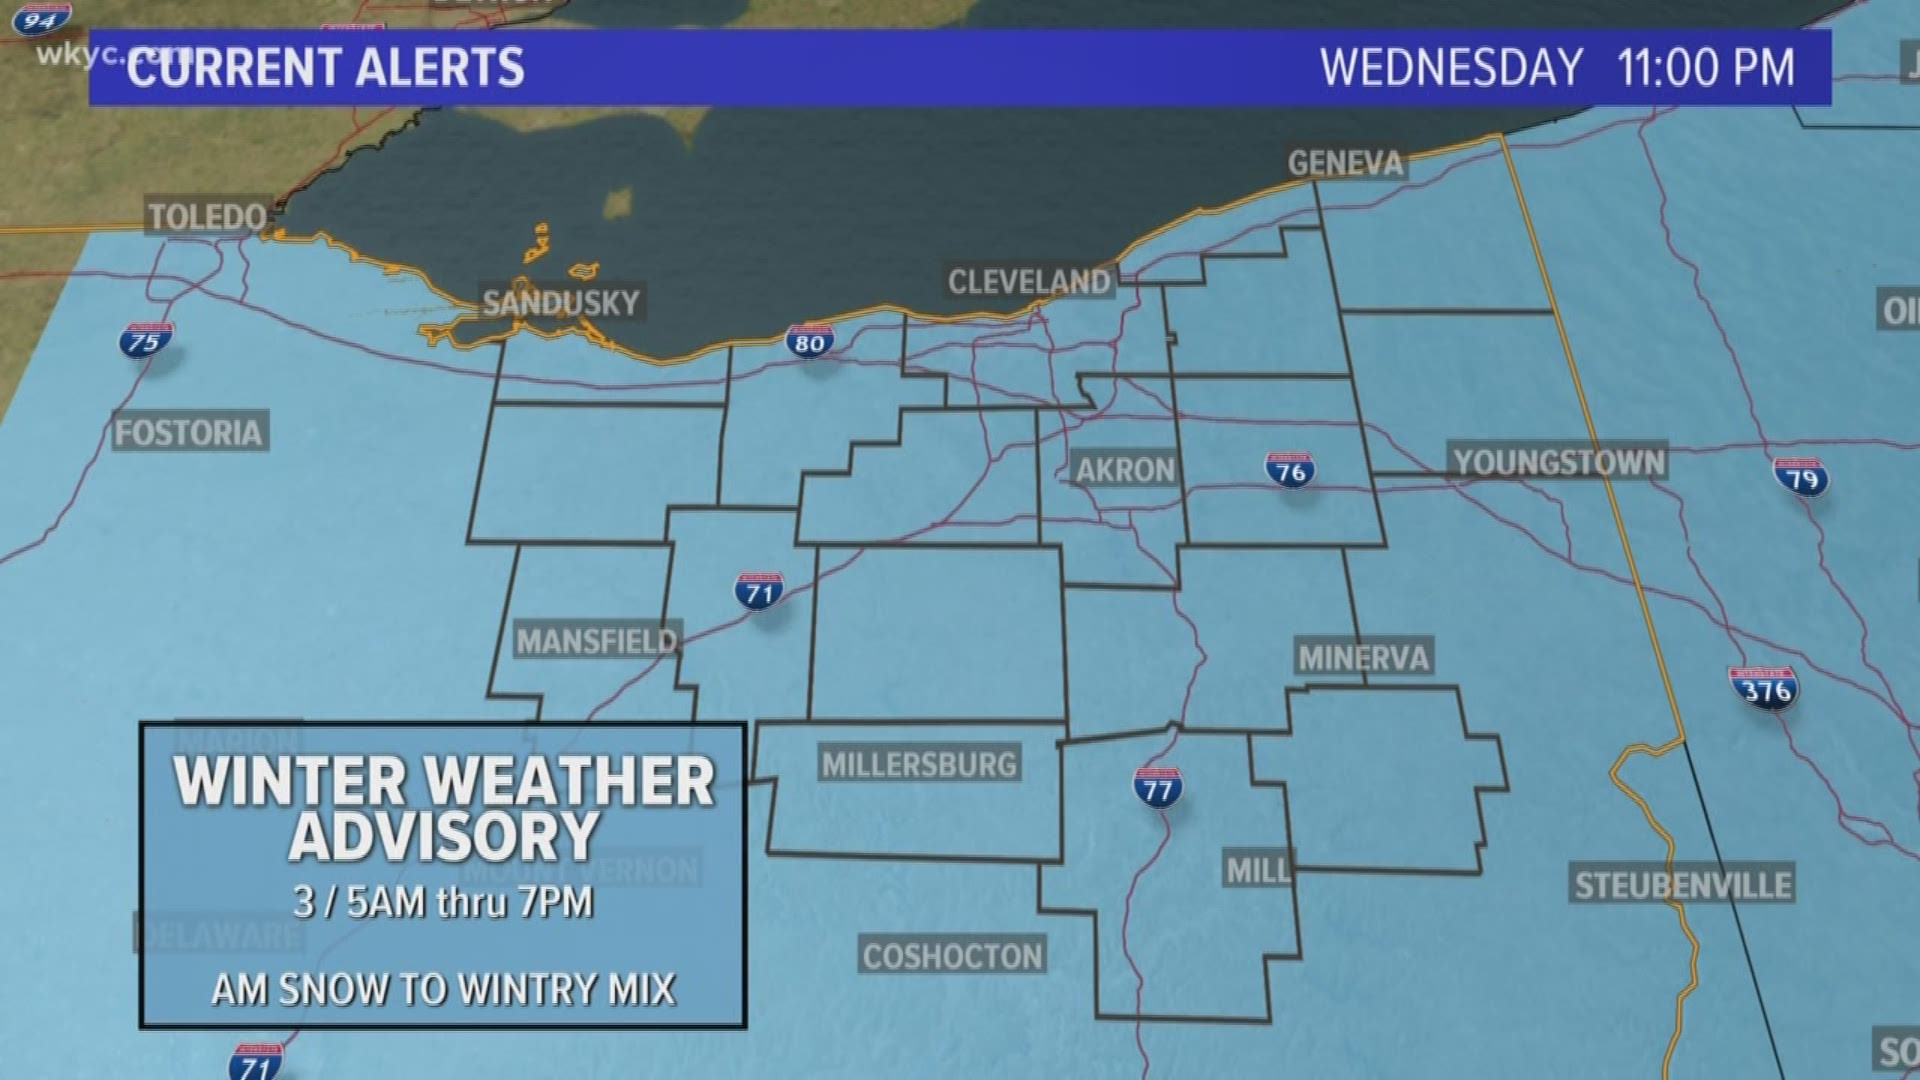 Winter Weather Advisory issued for all of Northeast Ohio